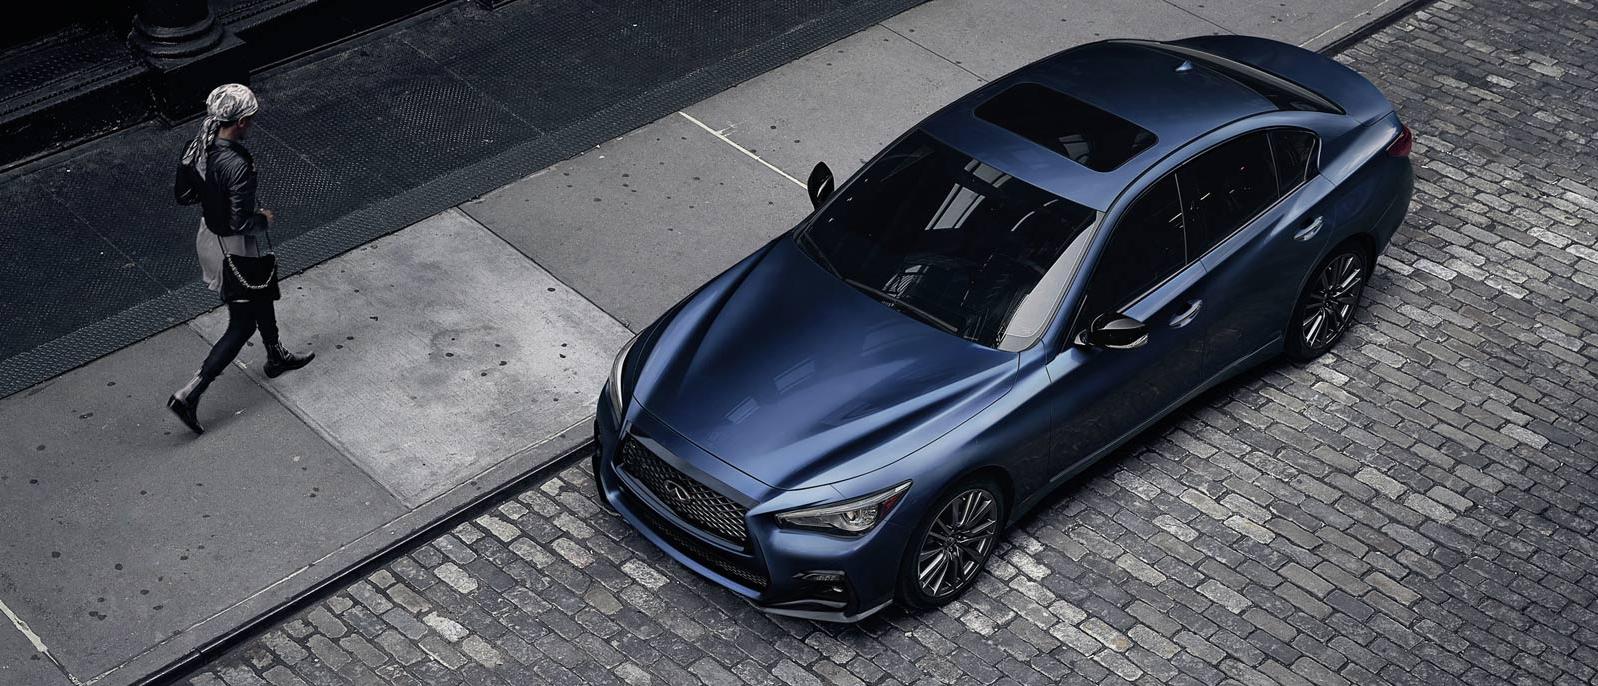 INFINITI Q50 Parked Outside on brick road with someone walking by